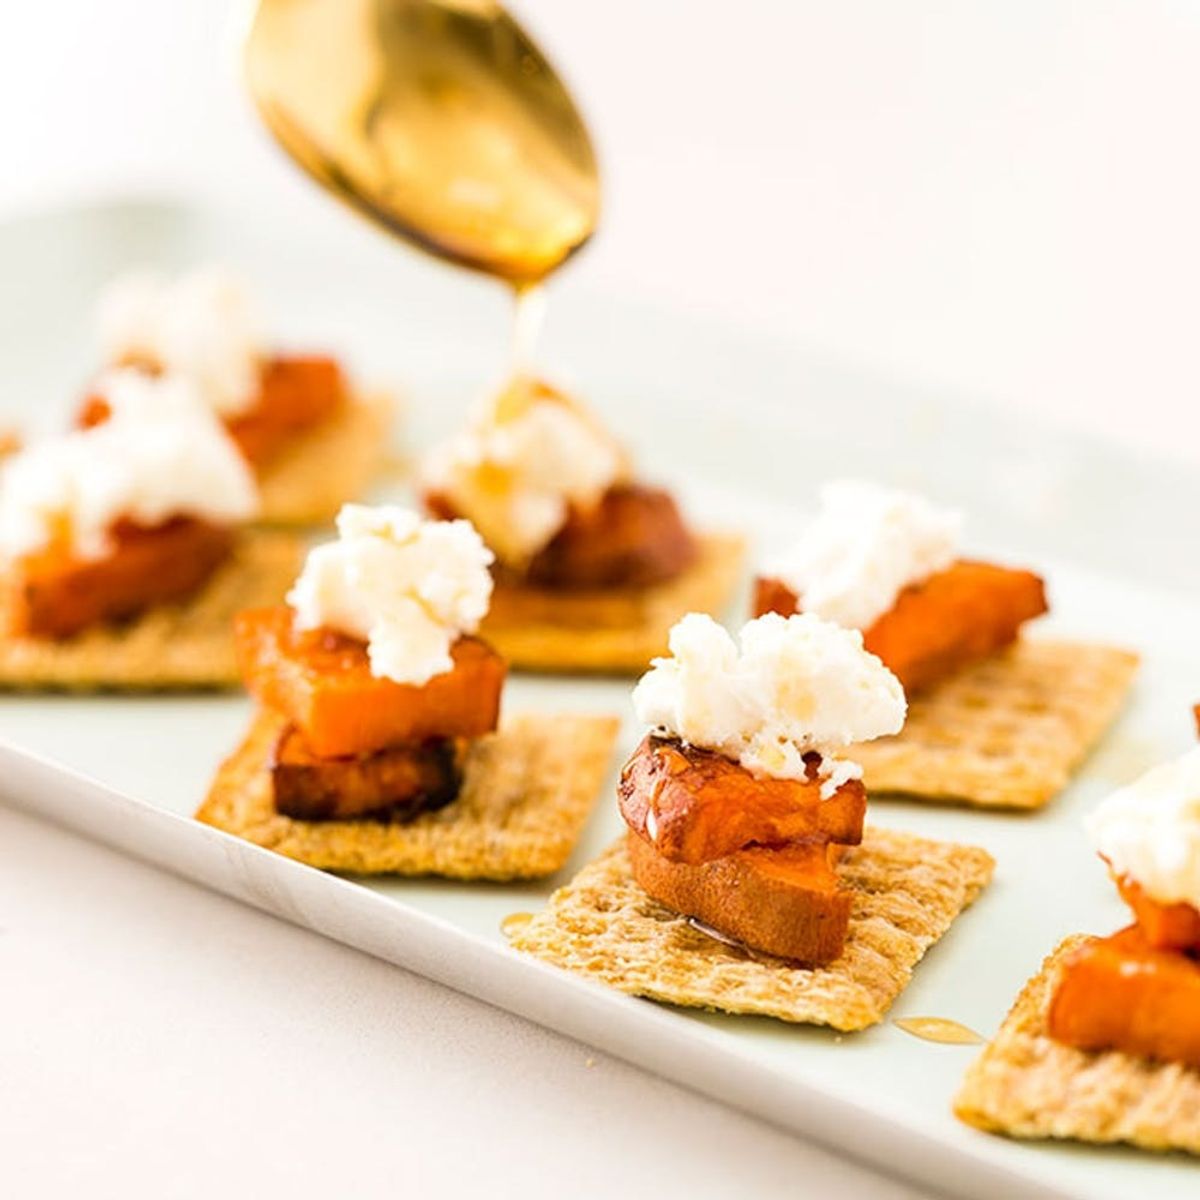 Make These Artisan-Inspired Appetizers for Your Next Gathering